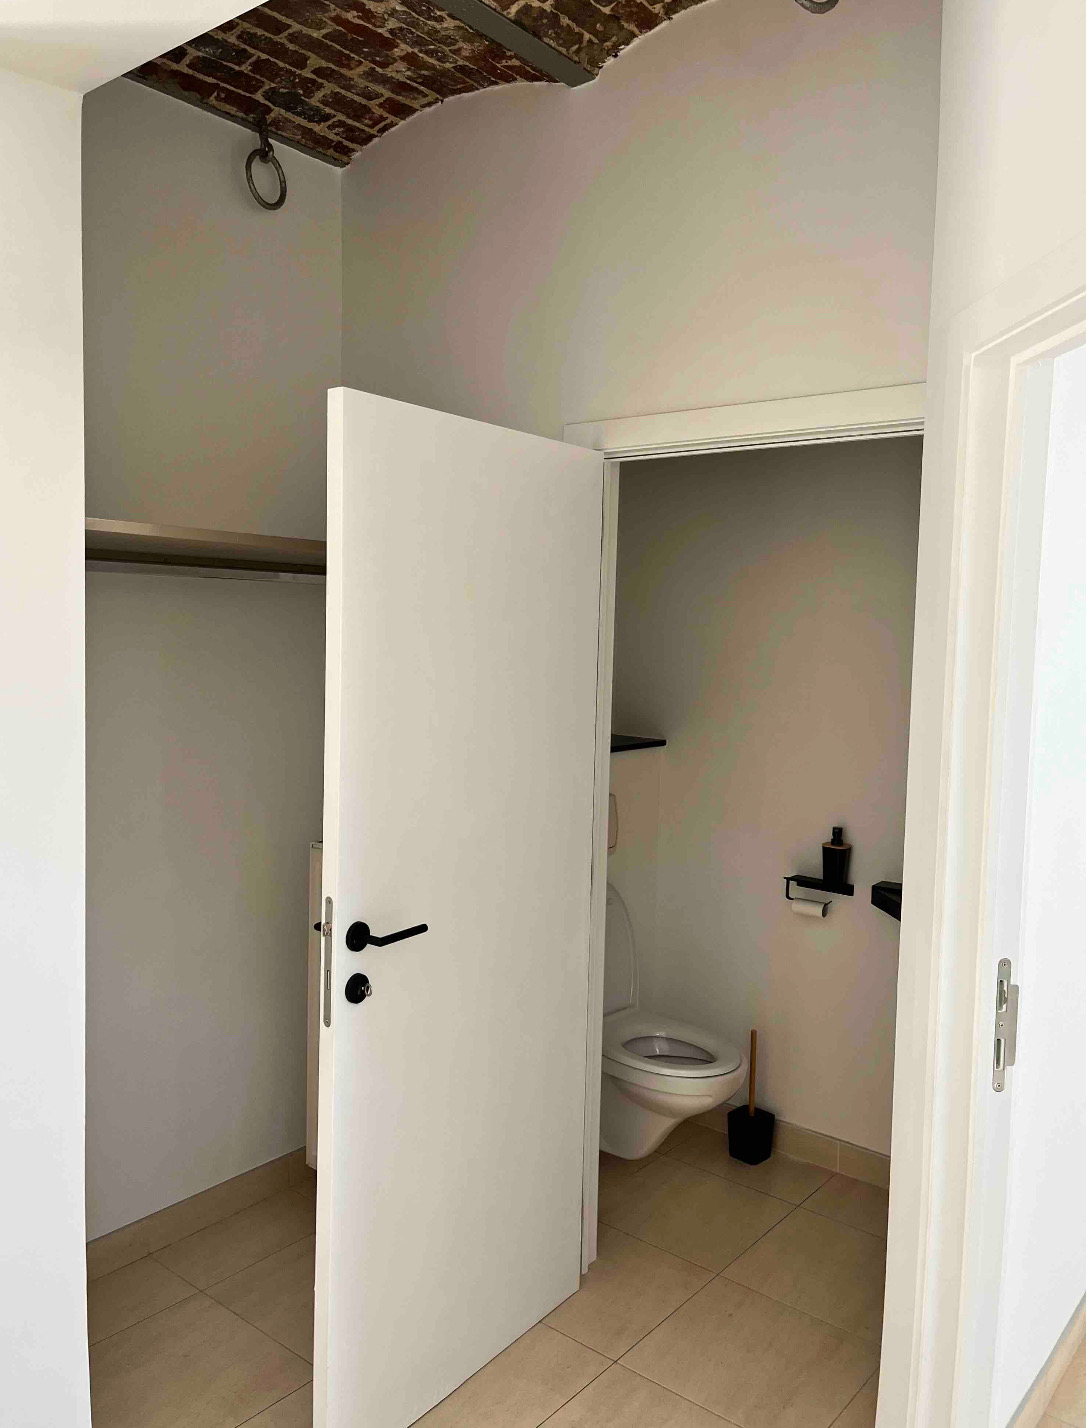 apartment for rent in brussels - toilet